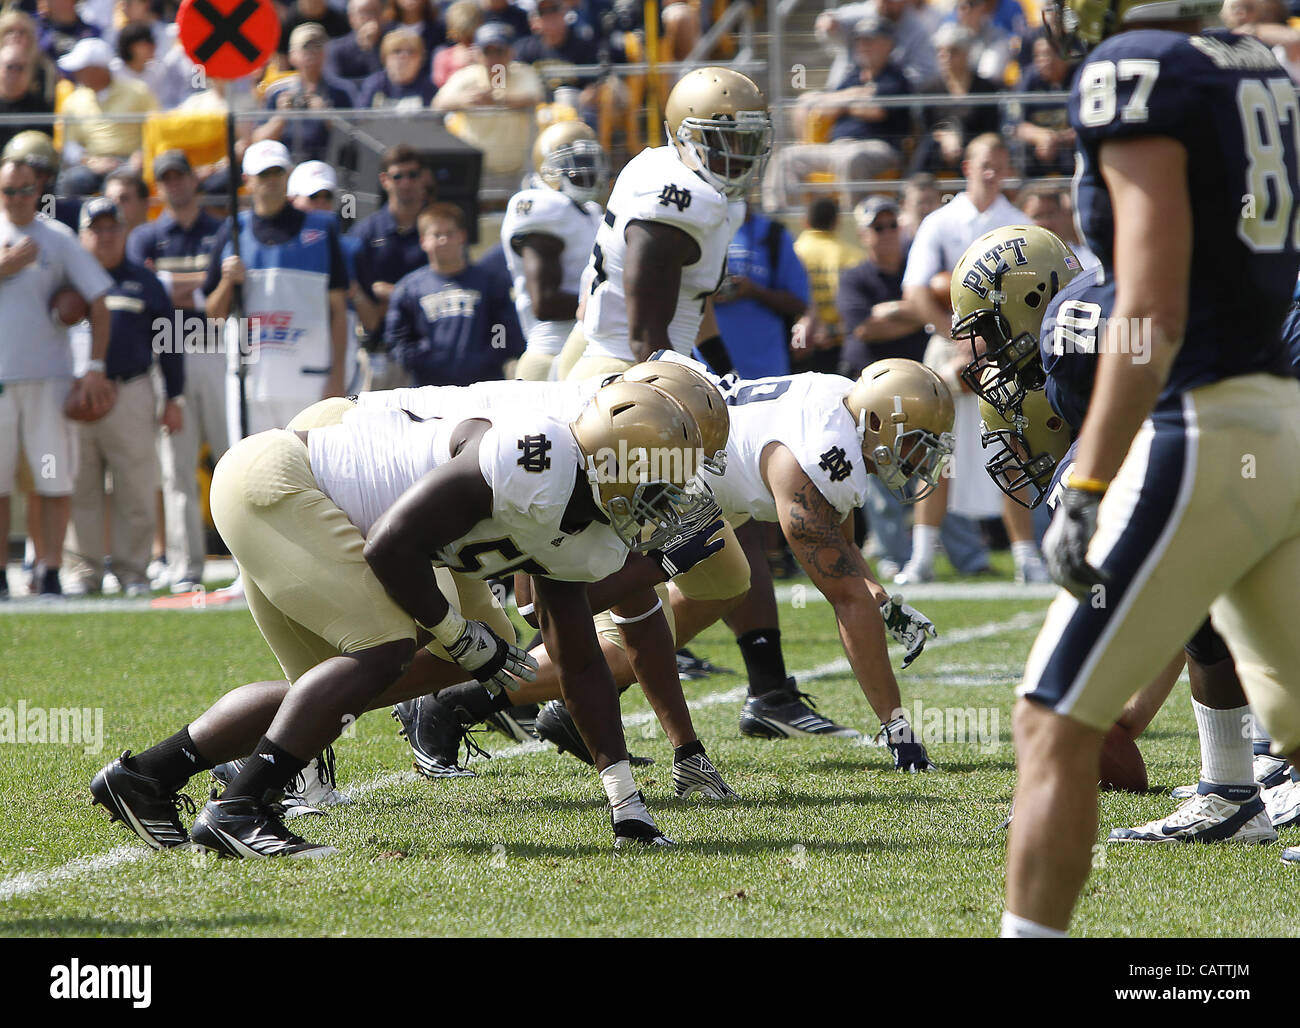 Sept. 24, 2011 - Pittsburgh, Pennsylvania, USA - The Notre Dame Fighting Irish were able to hold onto a slight lead to beat the University of Pittsburgh Panthers in Hienz Field.  Photo By Aaron Suozzi (Credit Image: © Aaron Souzzi/ZUMAPRESS.com) Stock Photo